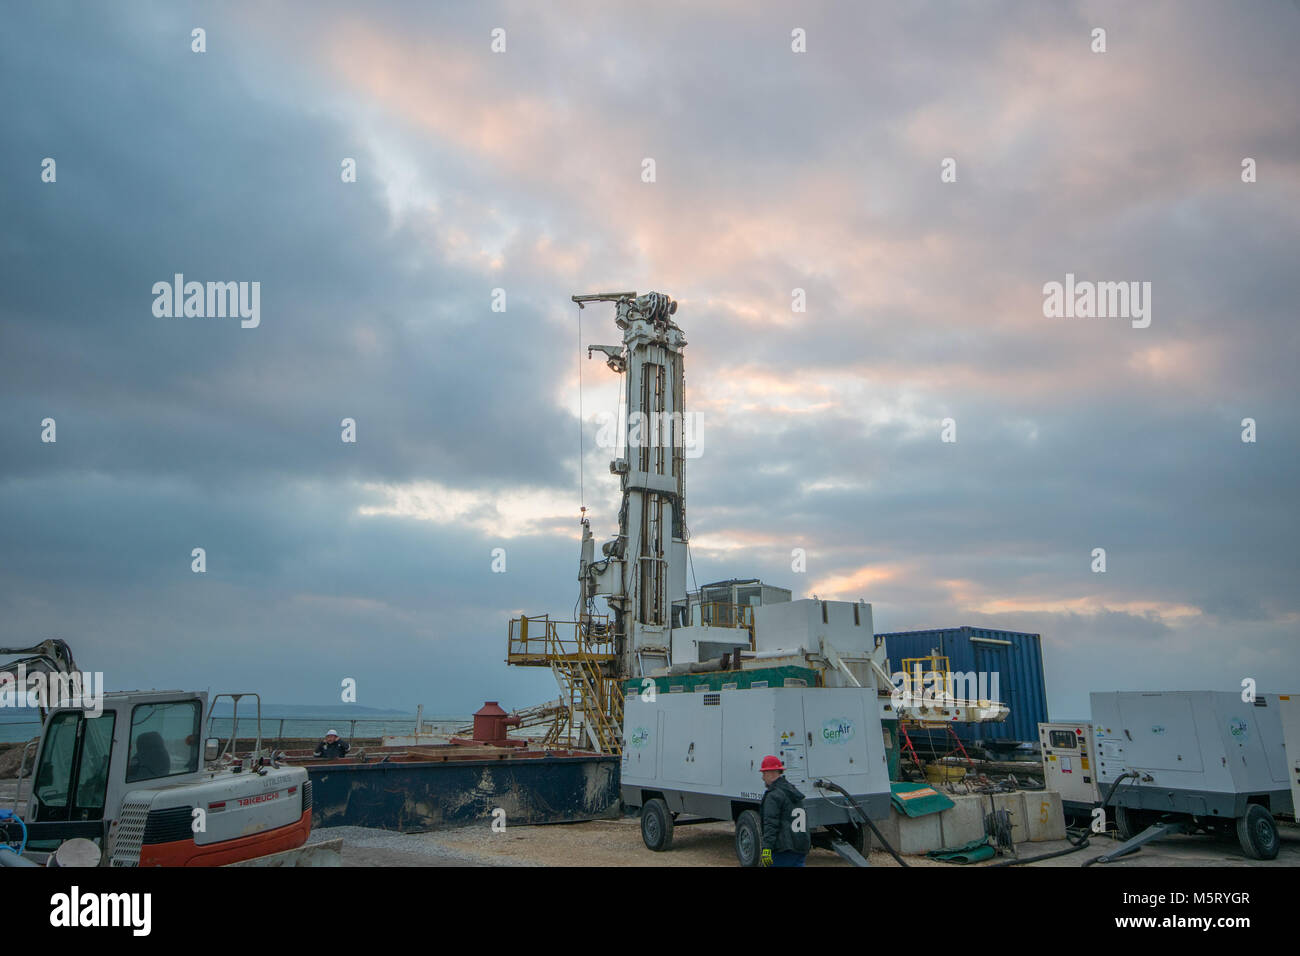 Jubilee Pool, Penzance, Cornwall, UK. 26th Feb 2018. UK Weather. On an aptly freezing cold morning, with siberian winds hitting Cornwall from the 'beast in the east' workers are getting ready to drill a 1.4km deep  bore hole to supply geothermal heat to part of the Jubilee Lido outdoor swimming pool.  This is the first such scheme undertaken in the UK. Credit: Simon Maycock/Alamy Live News Stock Photo